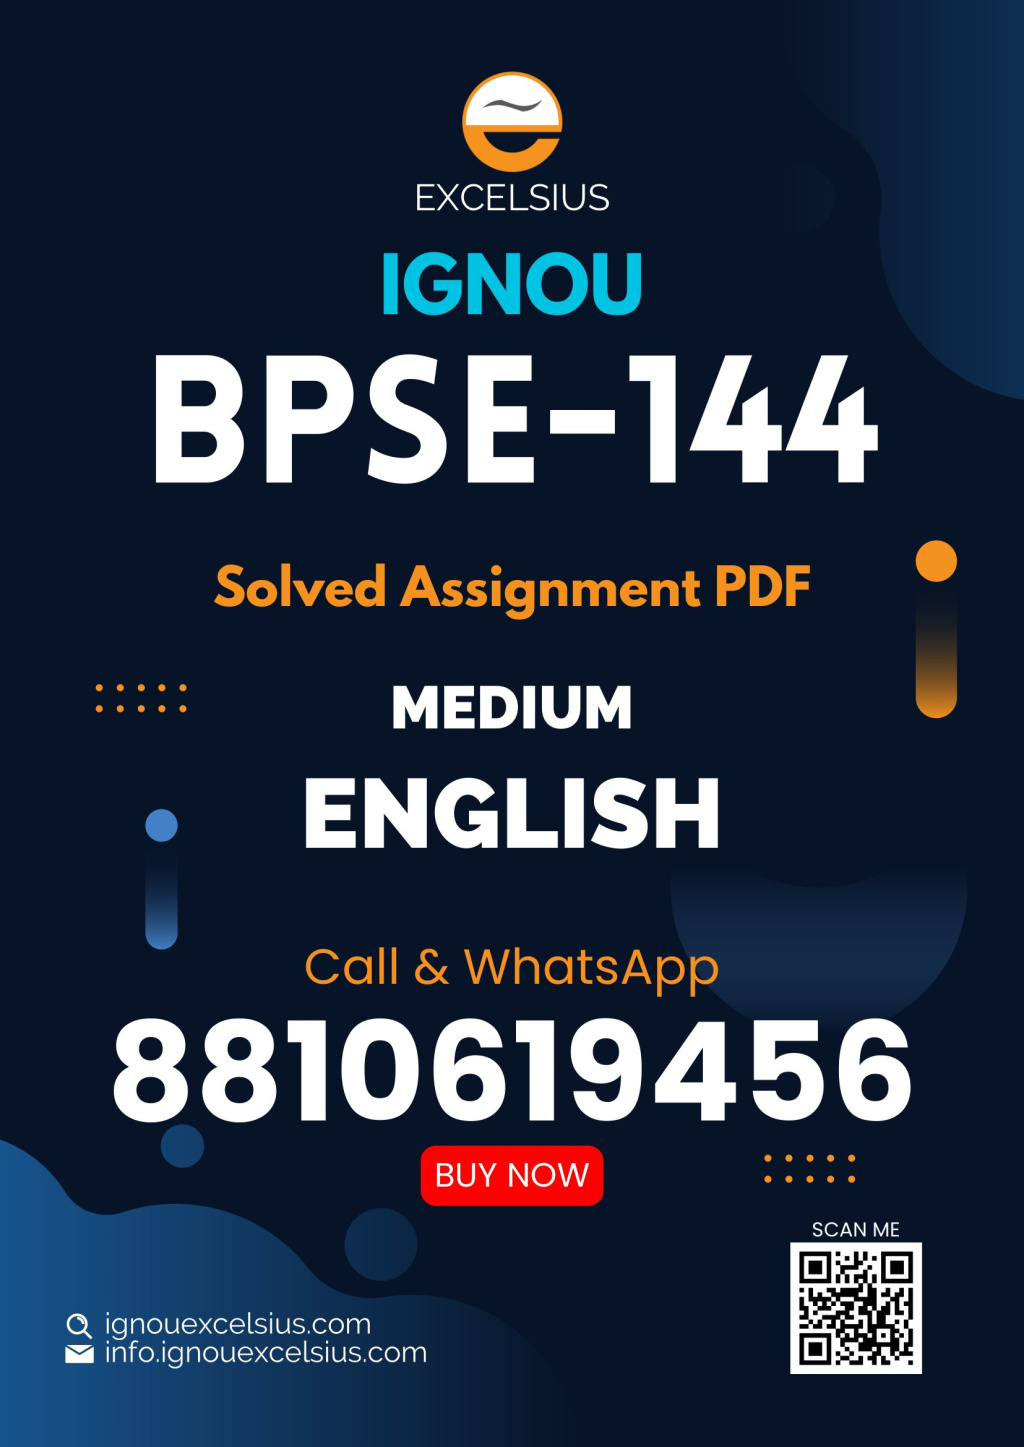 IGNOU BPSE-144 - Introduction to South Asia, Latest Solved Assignment-July 2022 – January 2023